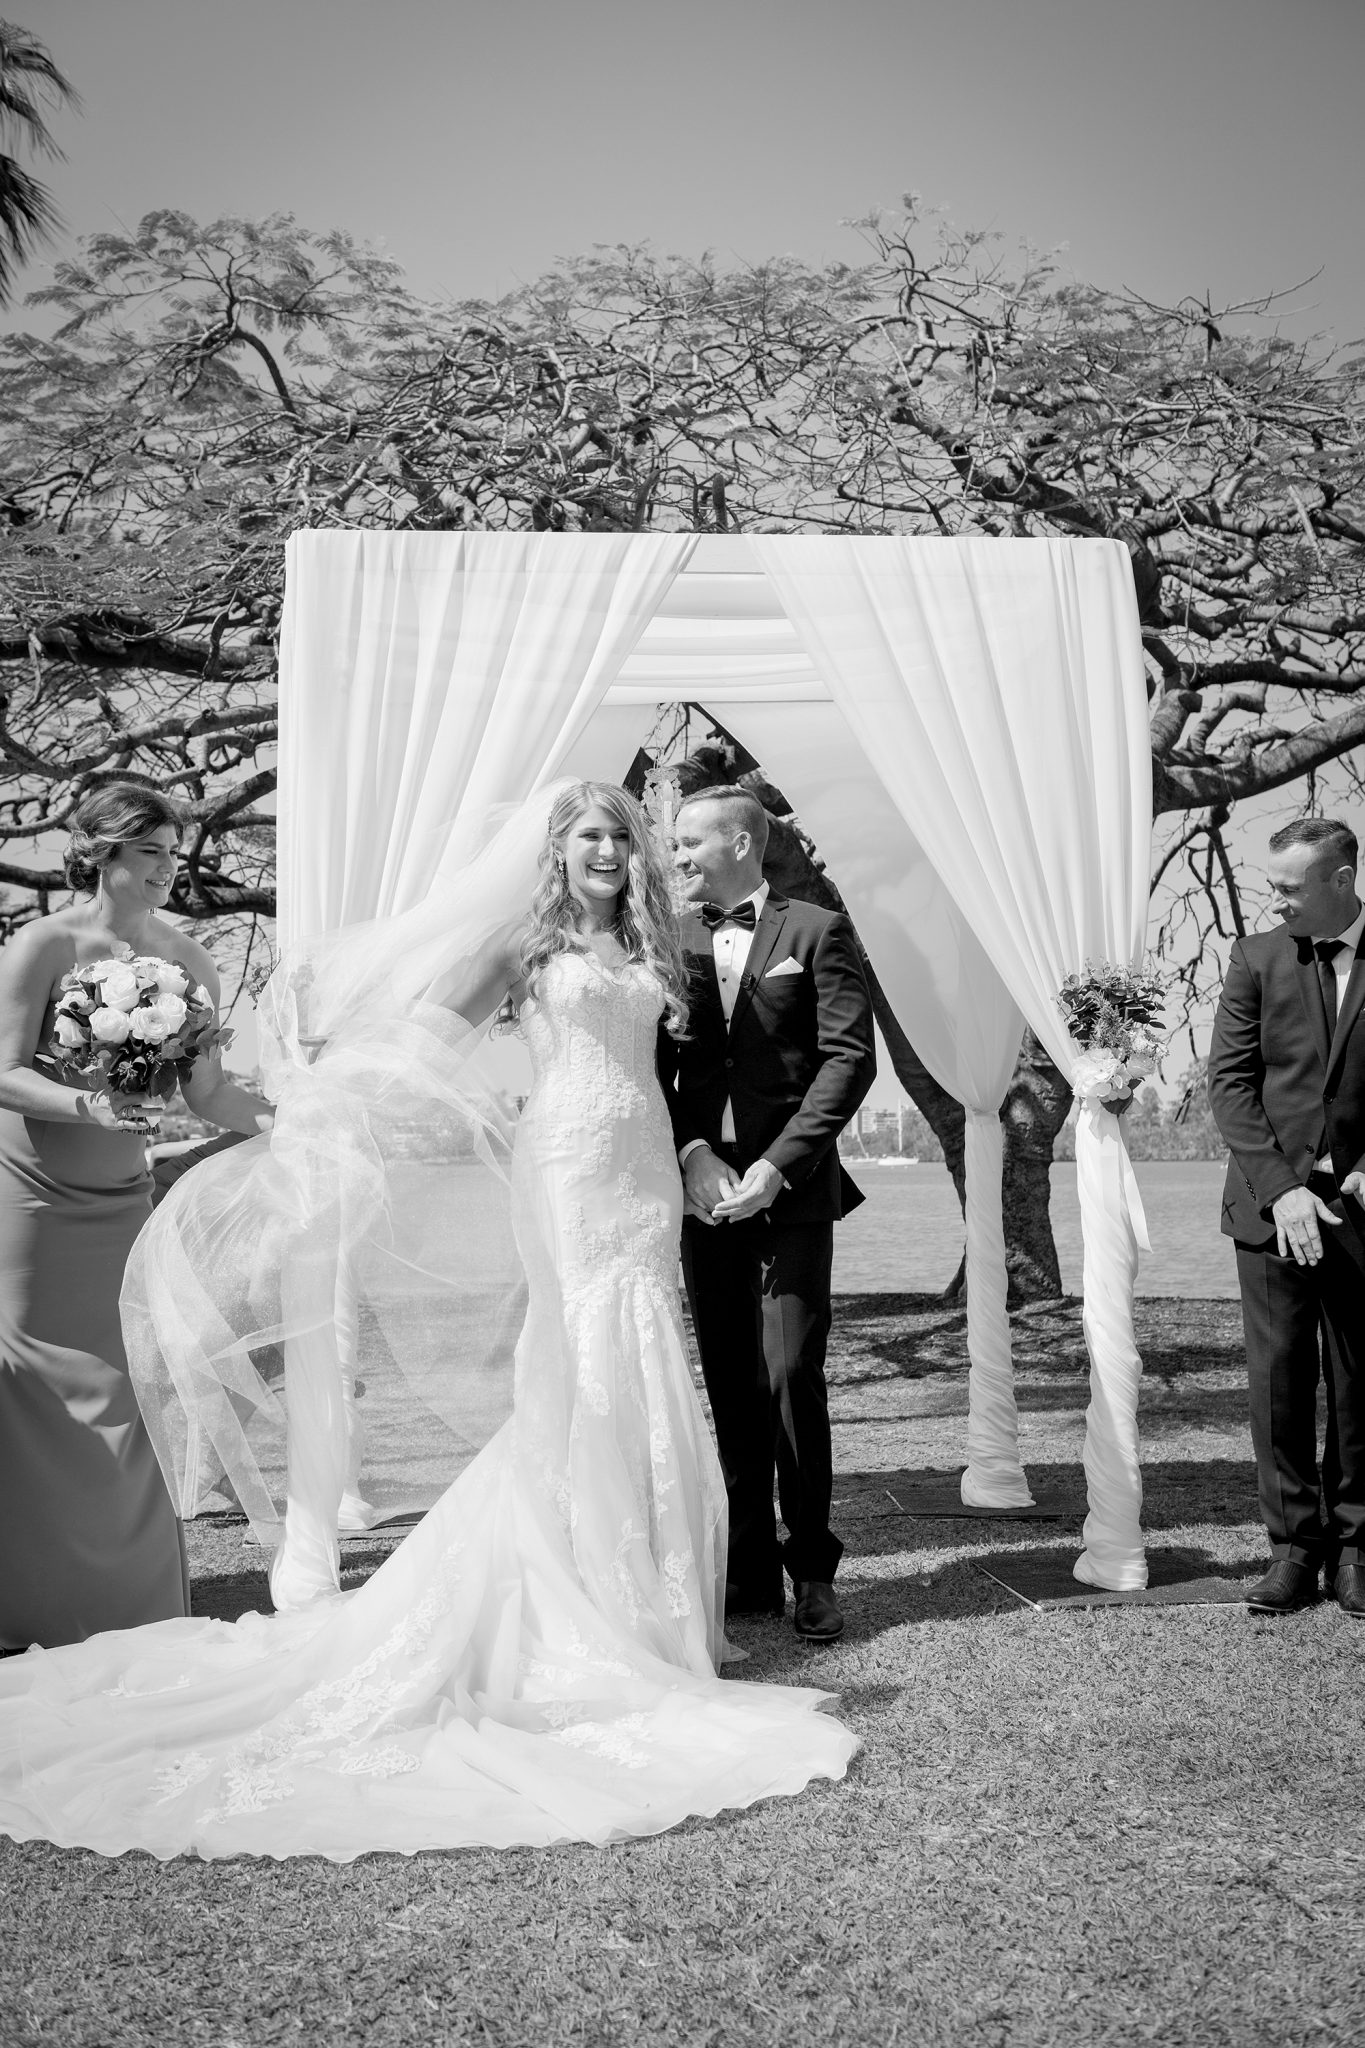 A Traditional Macedonian Wedding With Two Ceremonies - Wedded Wonderland